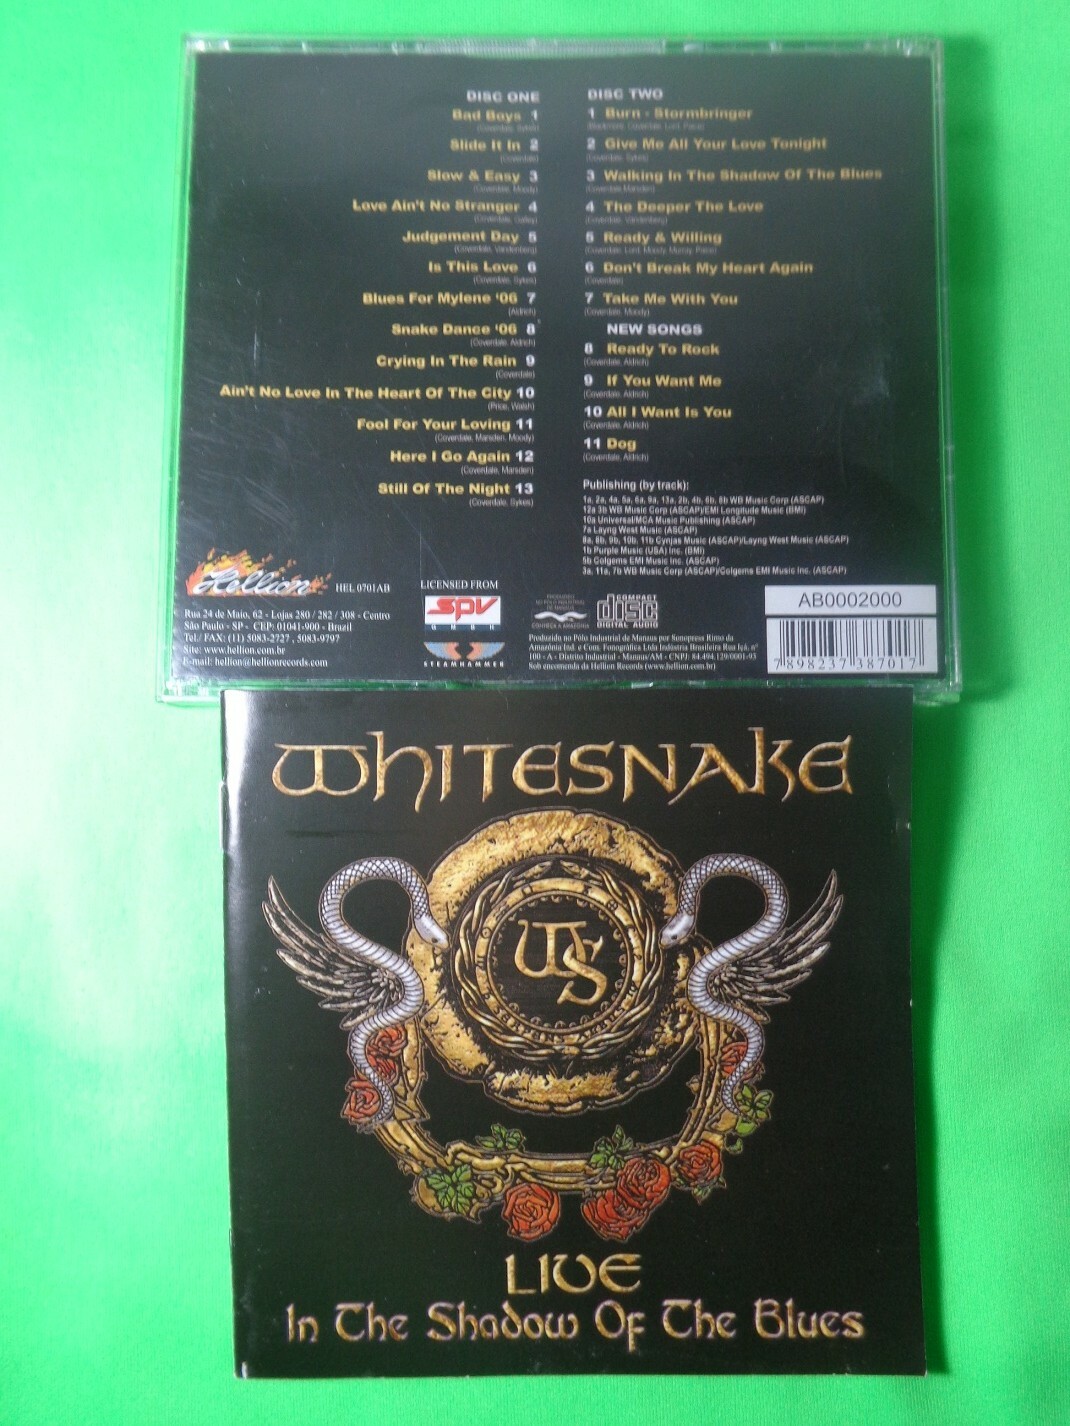 CD - Whitesnake - Live in the Shadow of the Blues (Duplo)